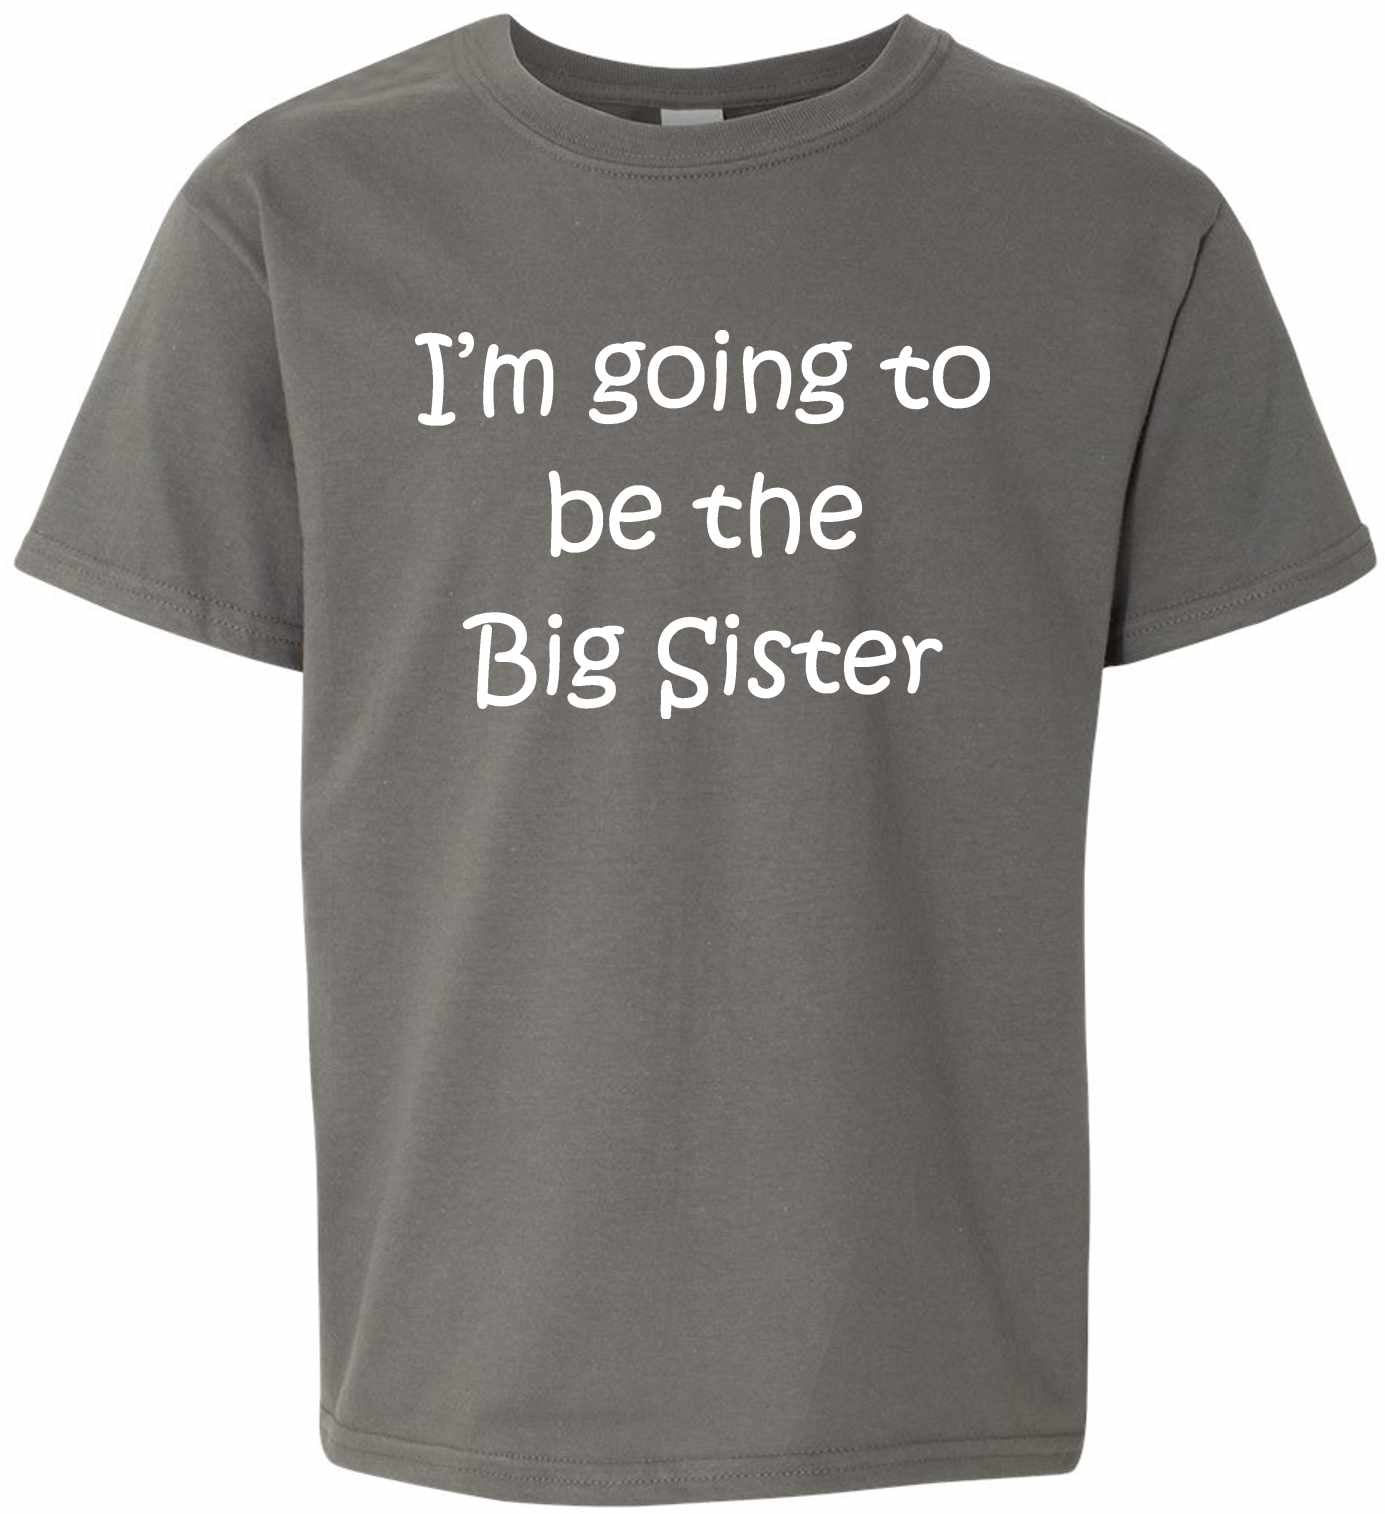 I'M GOING TO BE THE BIG SISTER on Kids T-Shirt (#578-201)